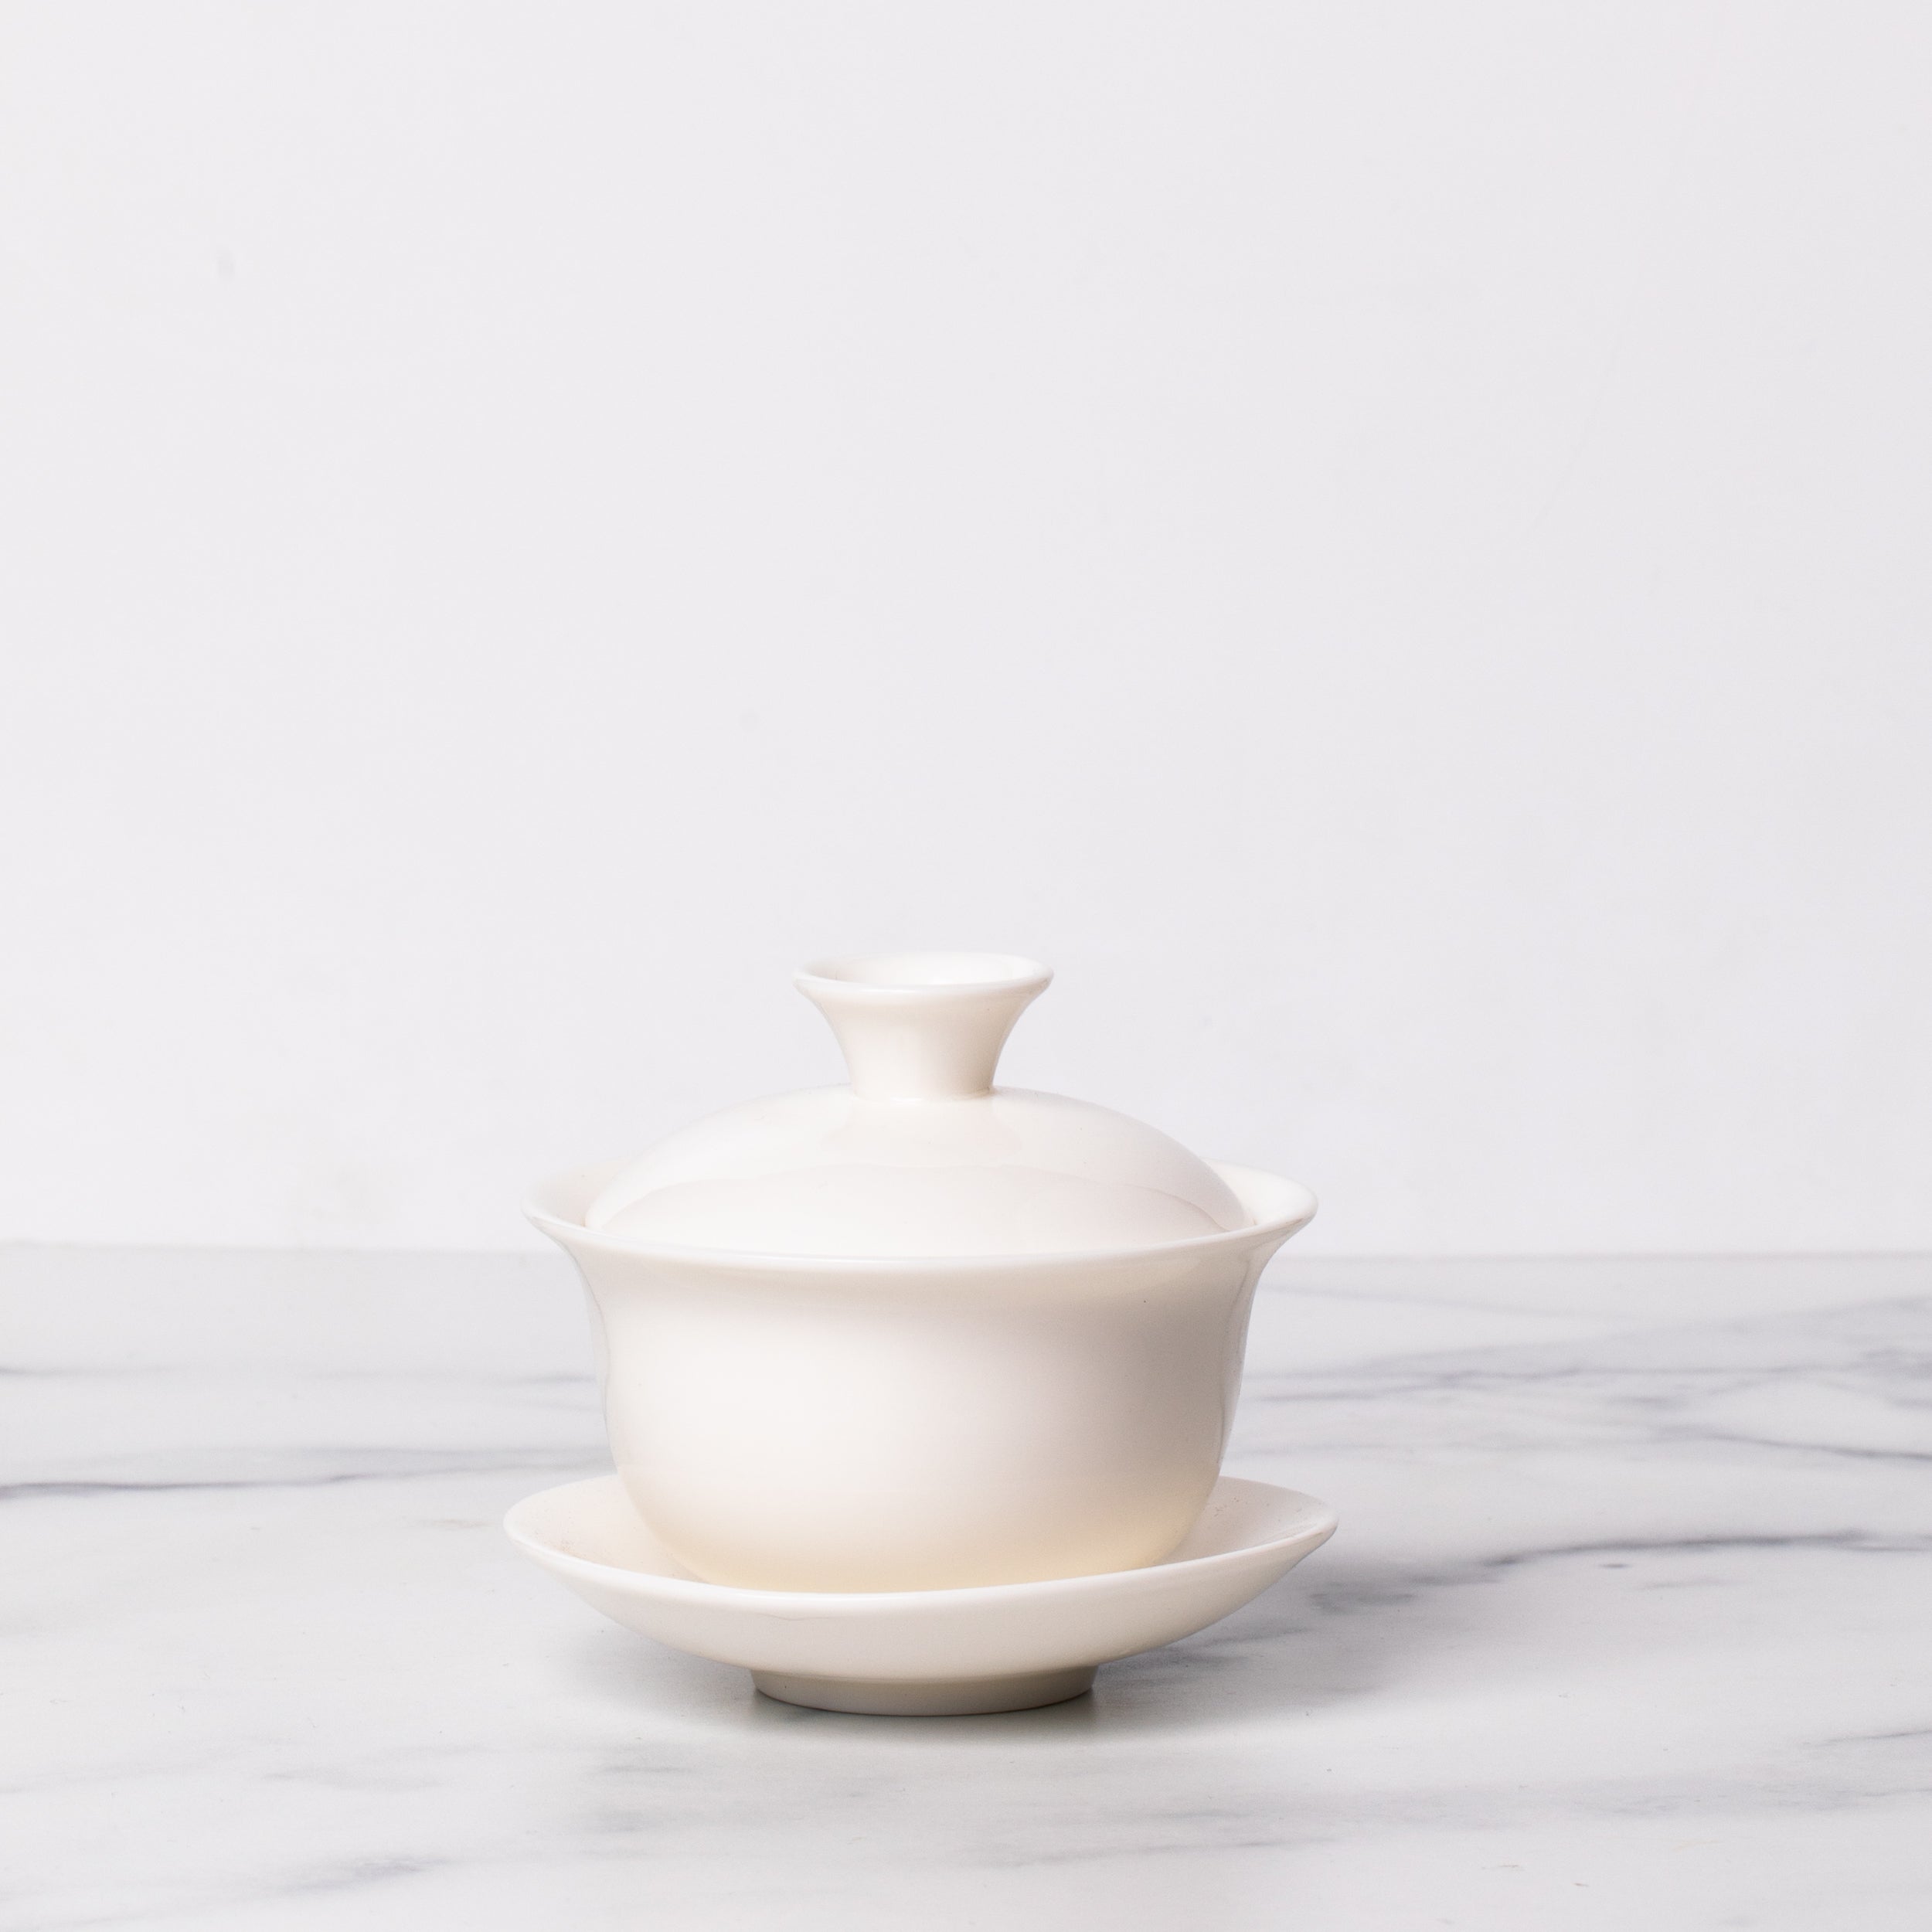 How to choose the right gaiwan for your tea. Criterias of choice